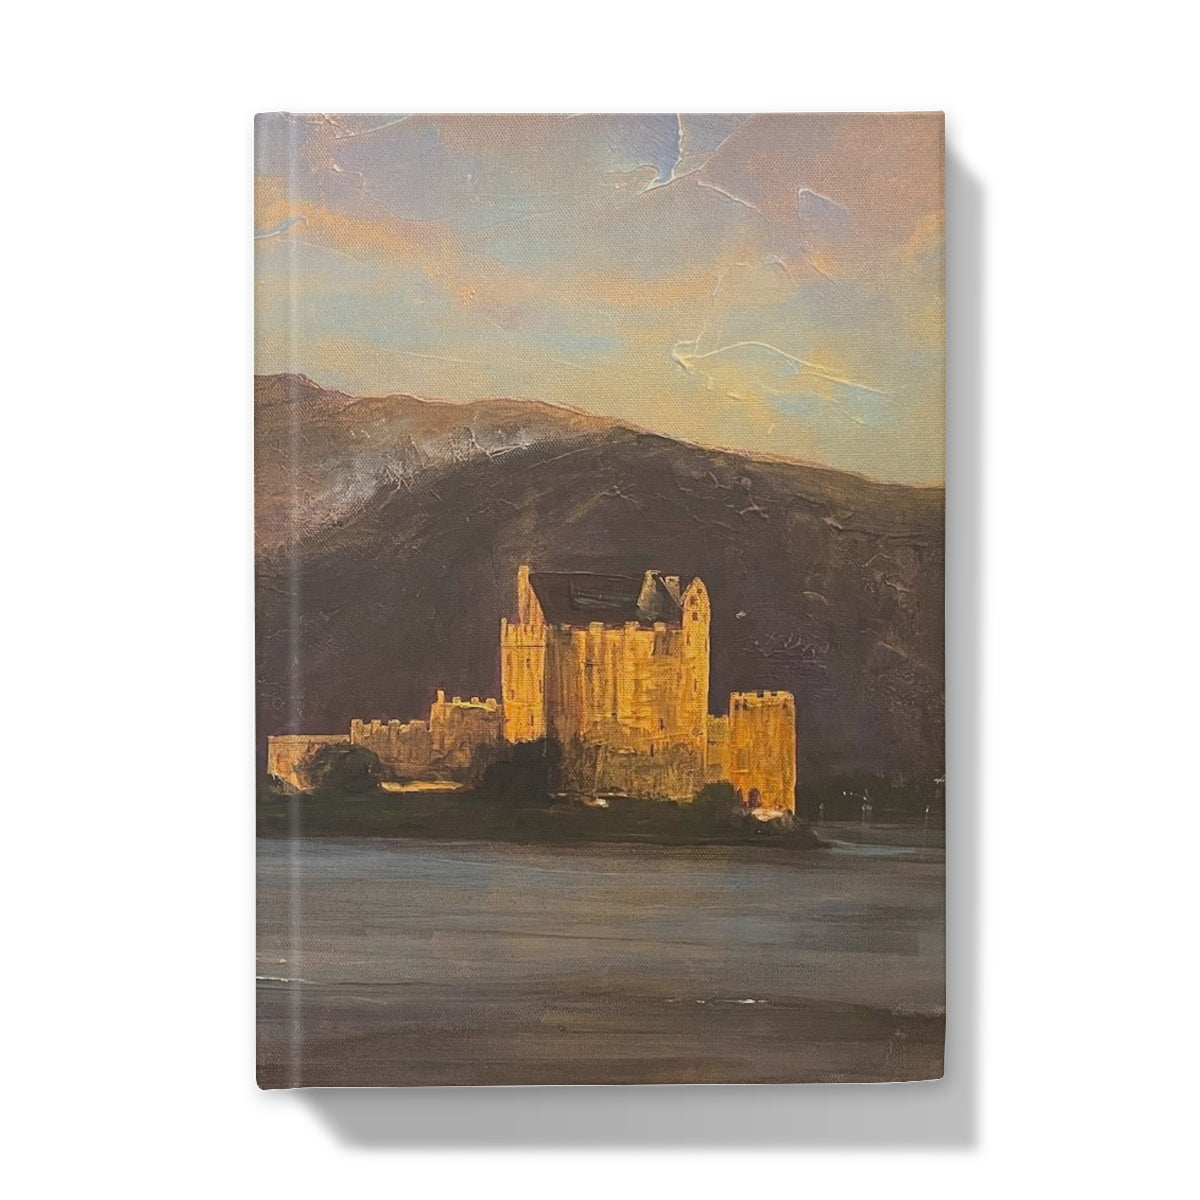 Eilean Donan Castle Art Gifts Hardback Journal-Journals & Notebooks-Historic & Iconic Scotland Art Gallery-A4-Lined-Paintings, Prints, Homeware, Art Gifts From Scotland By Scottish Artist Kevin Hunter